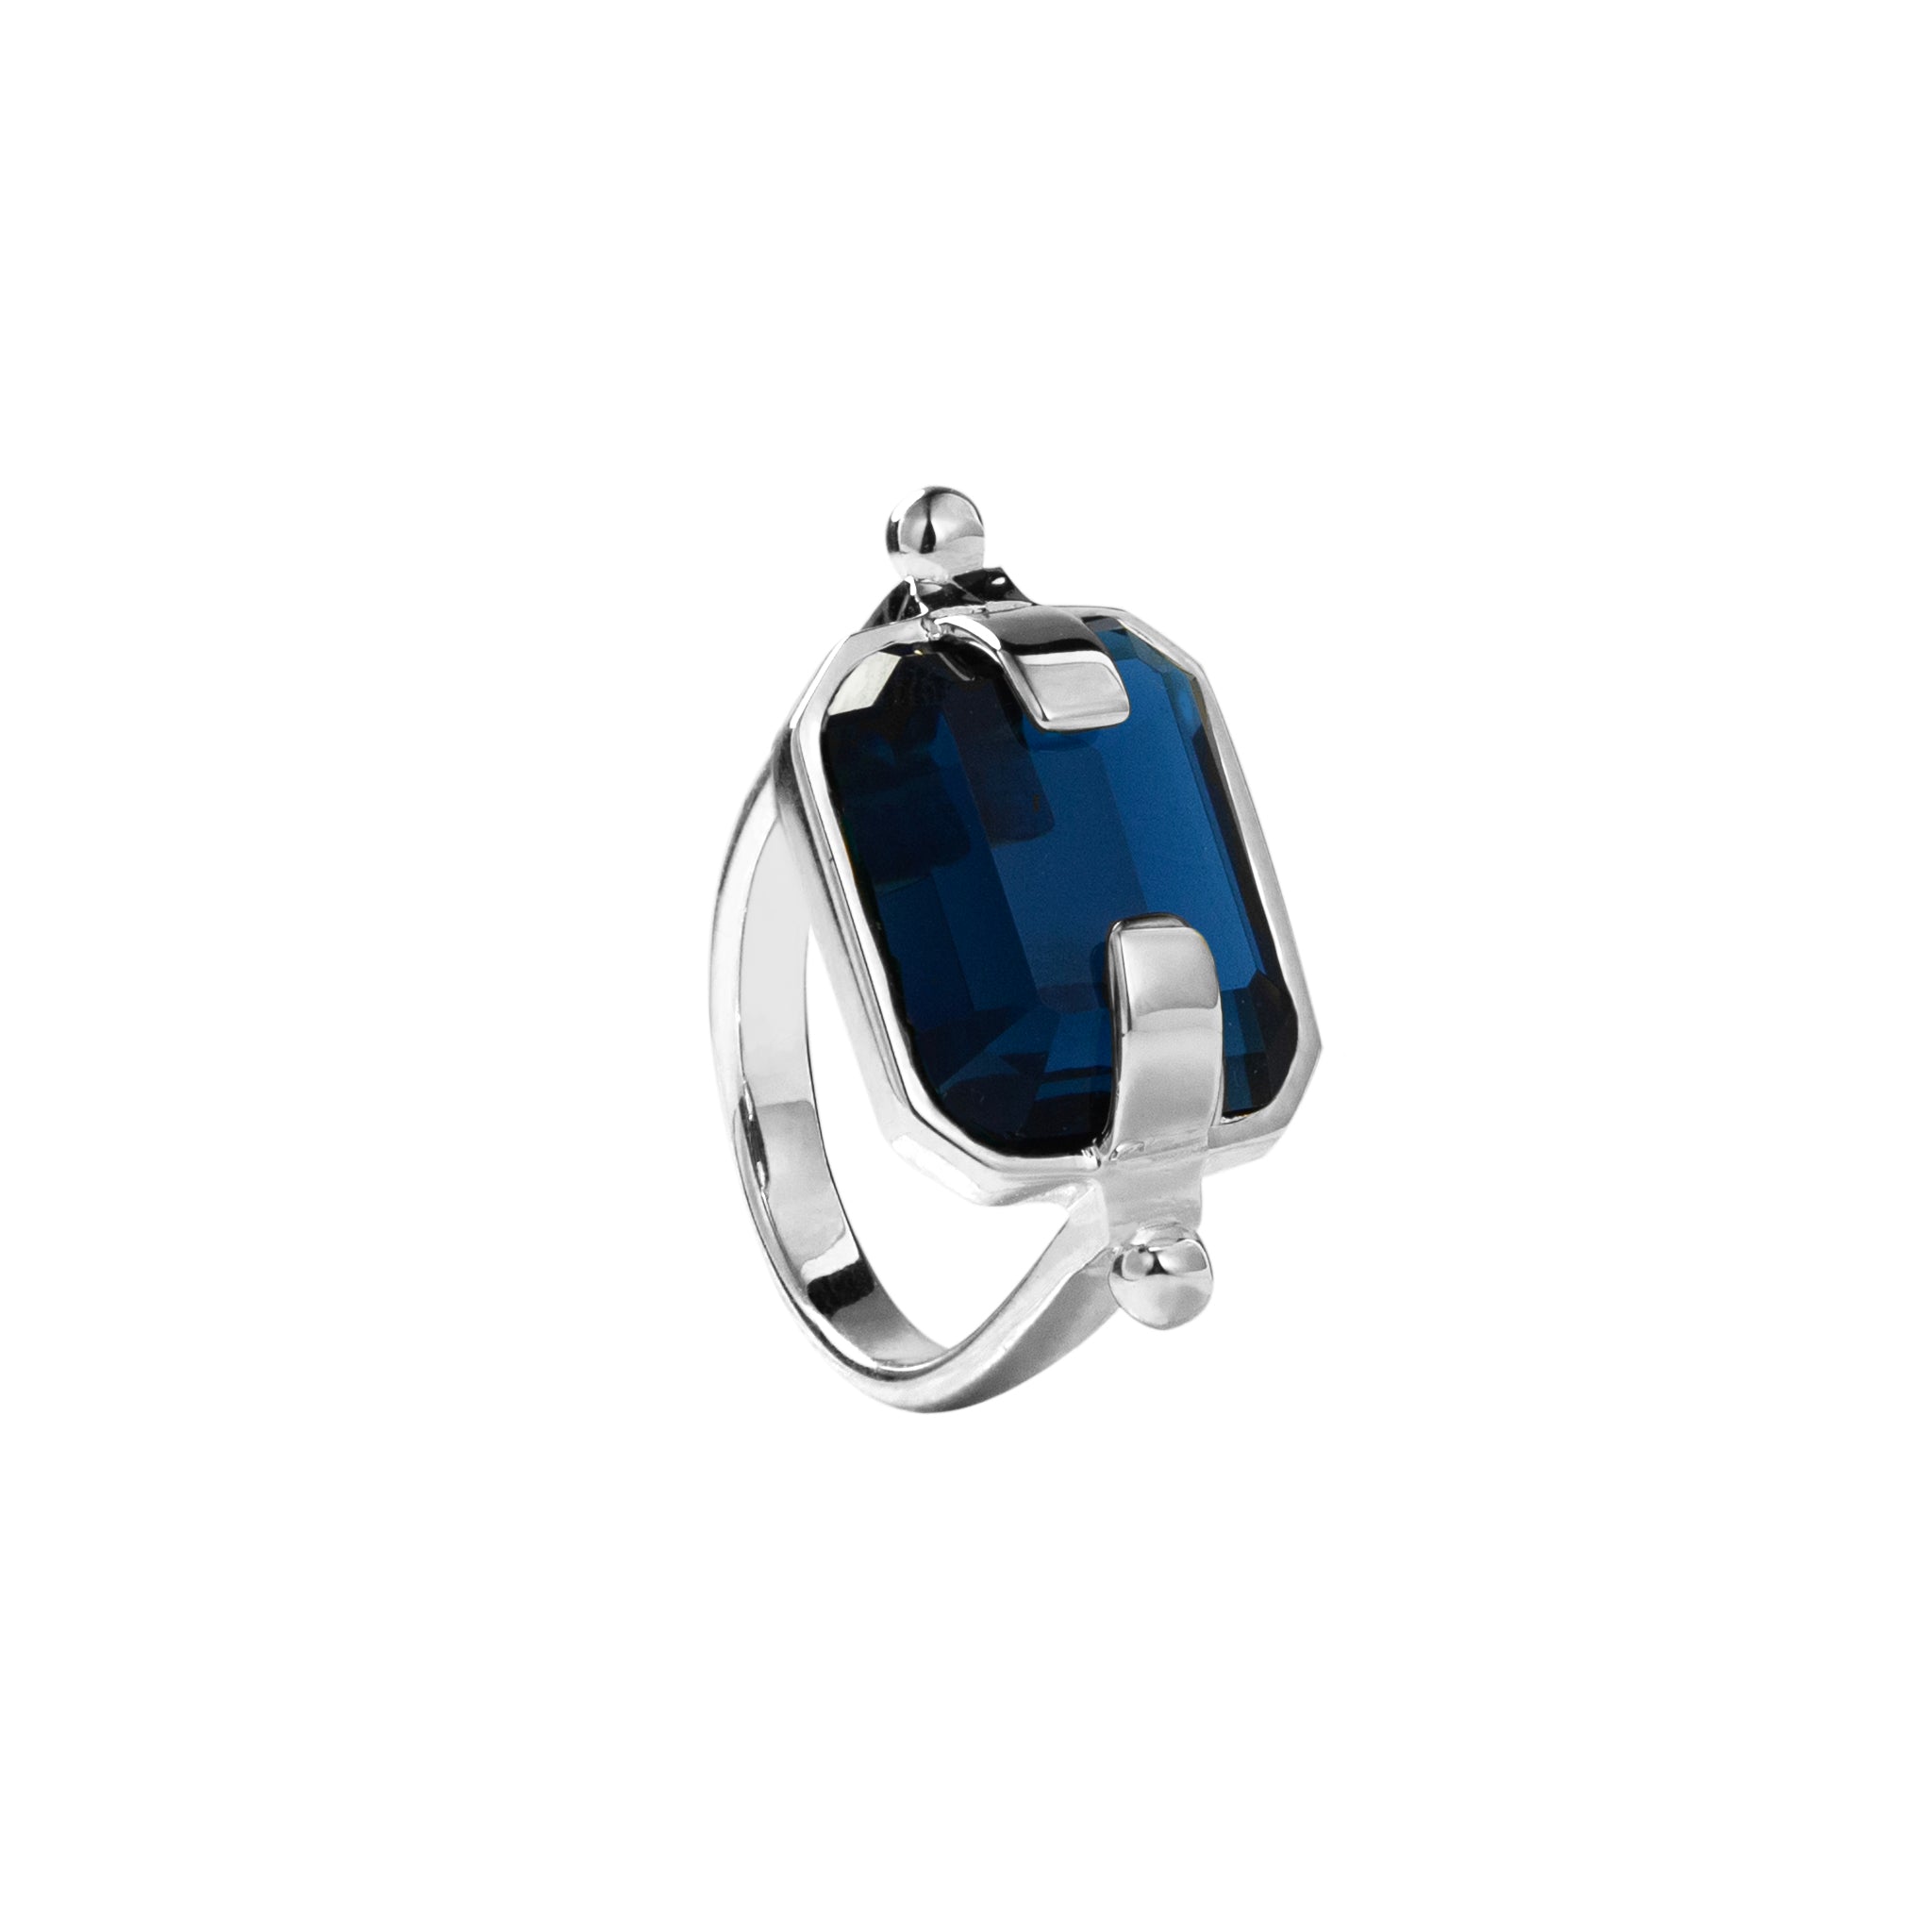 Ring with a blue crystal